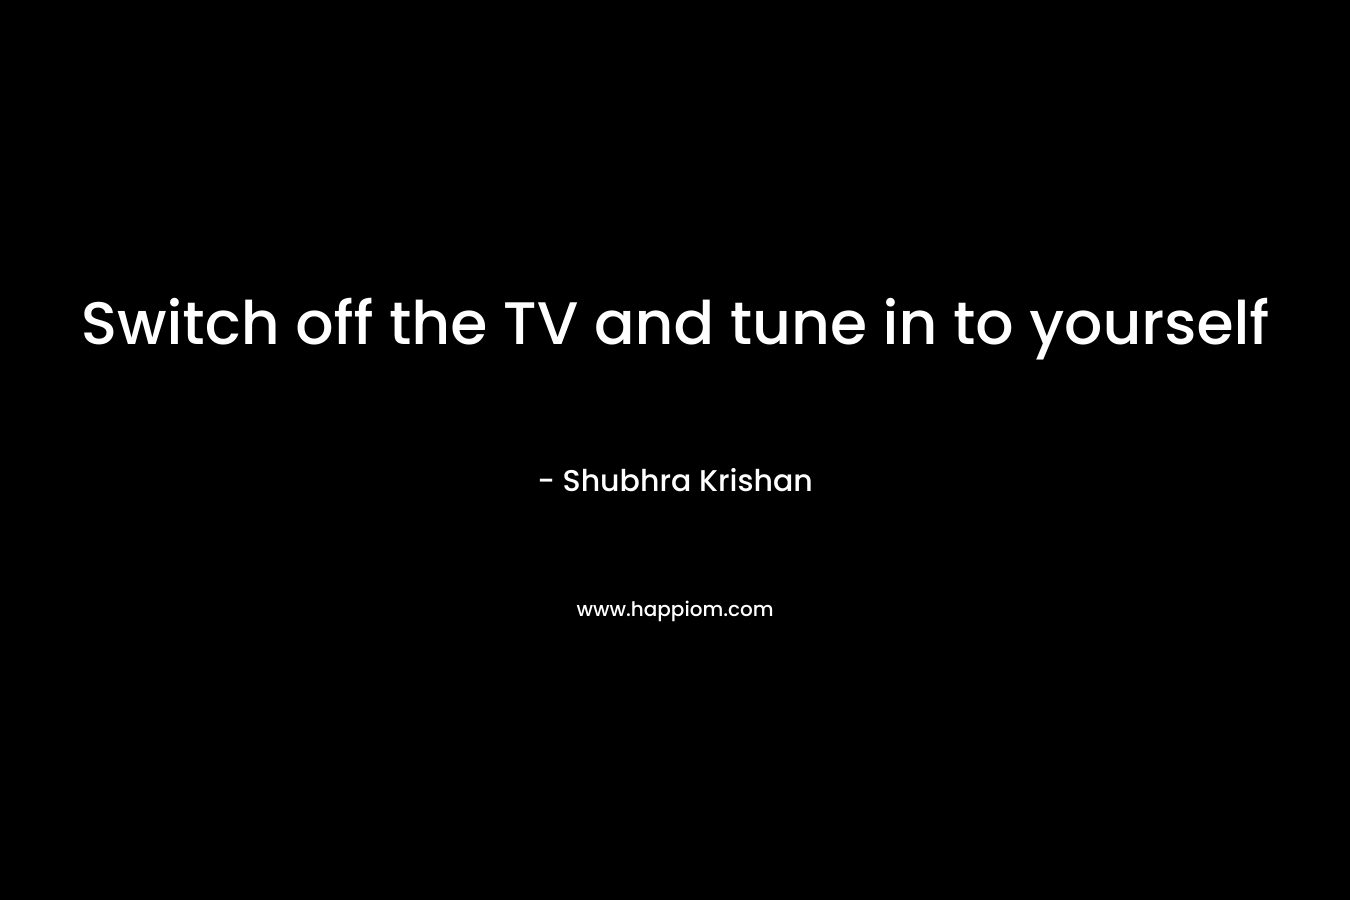 Switch off the TV and tune in to yourself